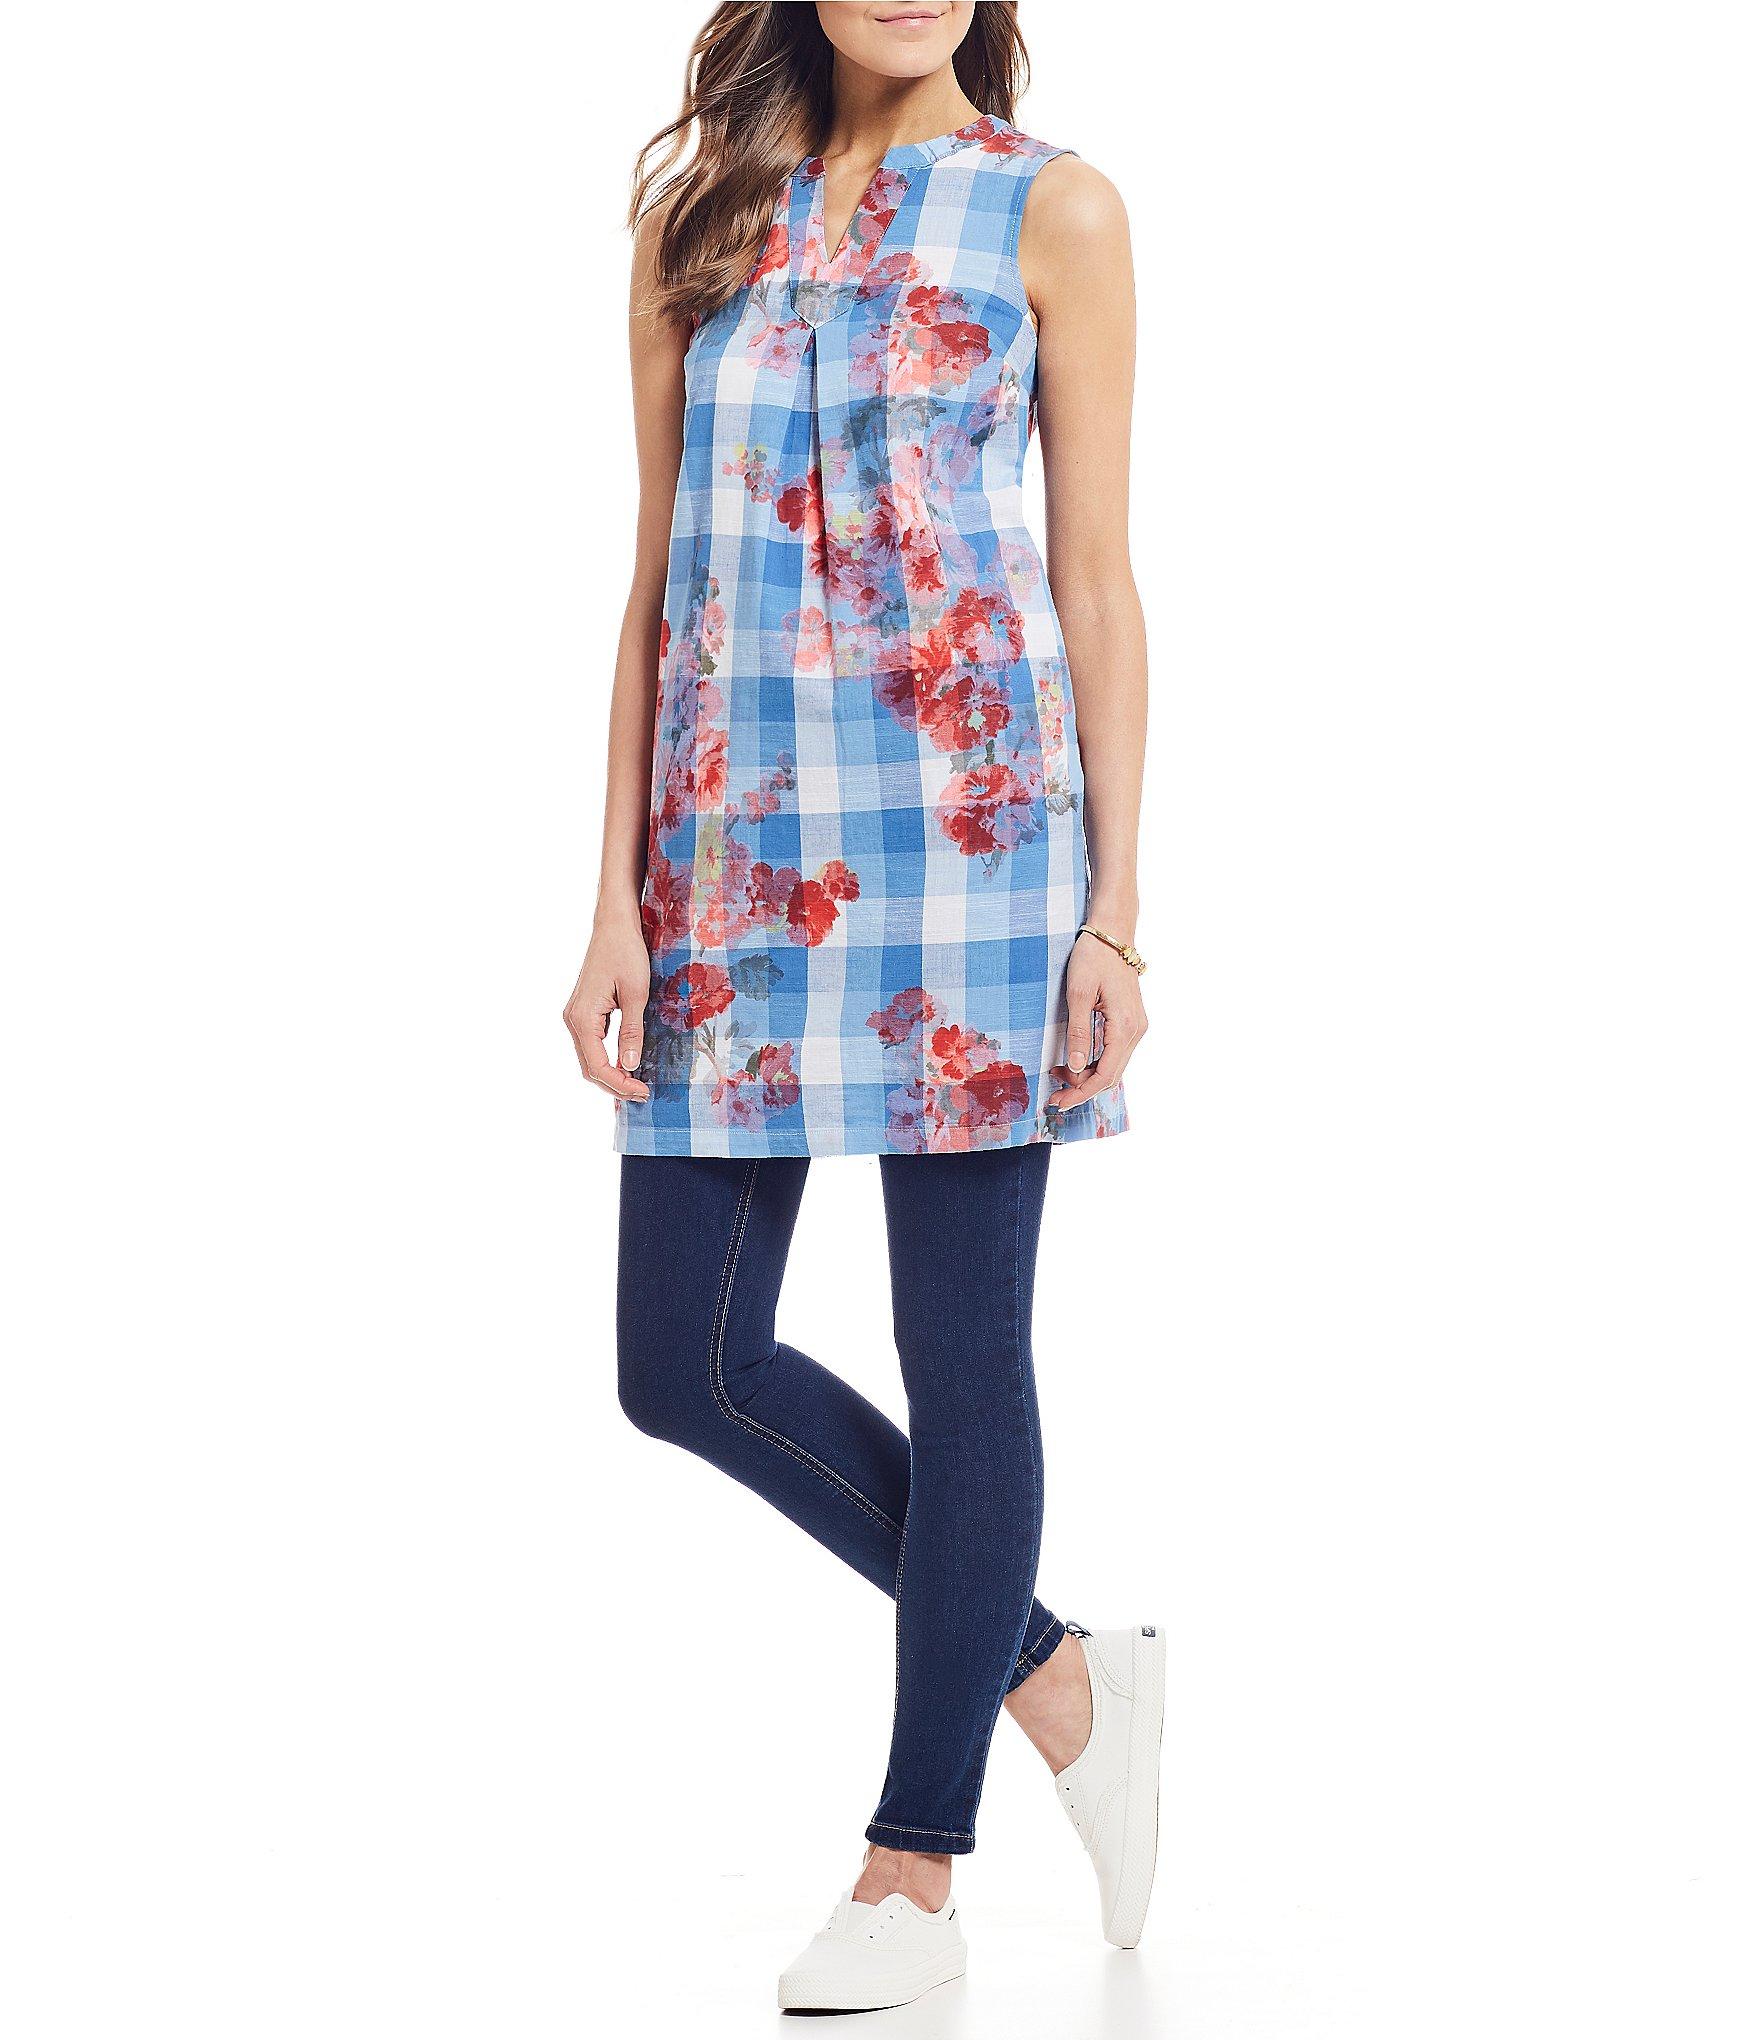 Joules Jillian Plaid Floral Print Sleeveless Tunic Top in Blue - Lyst